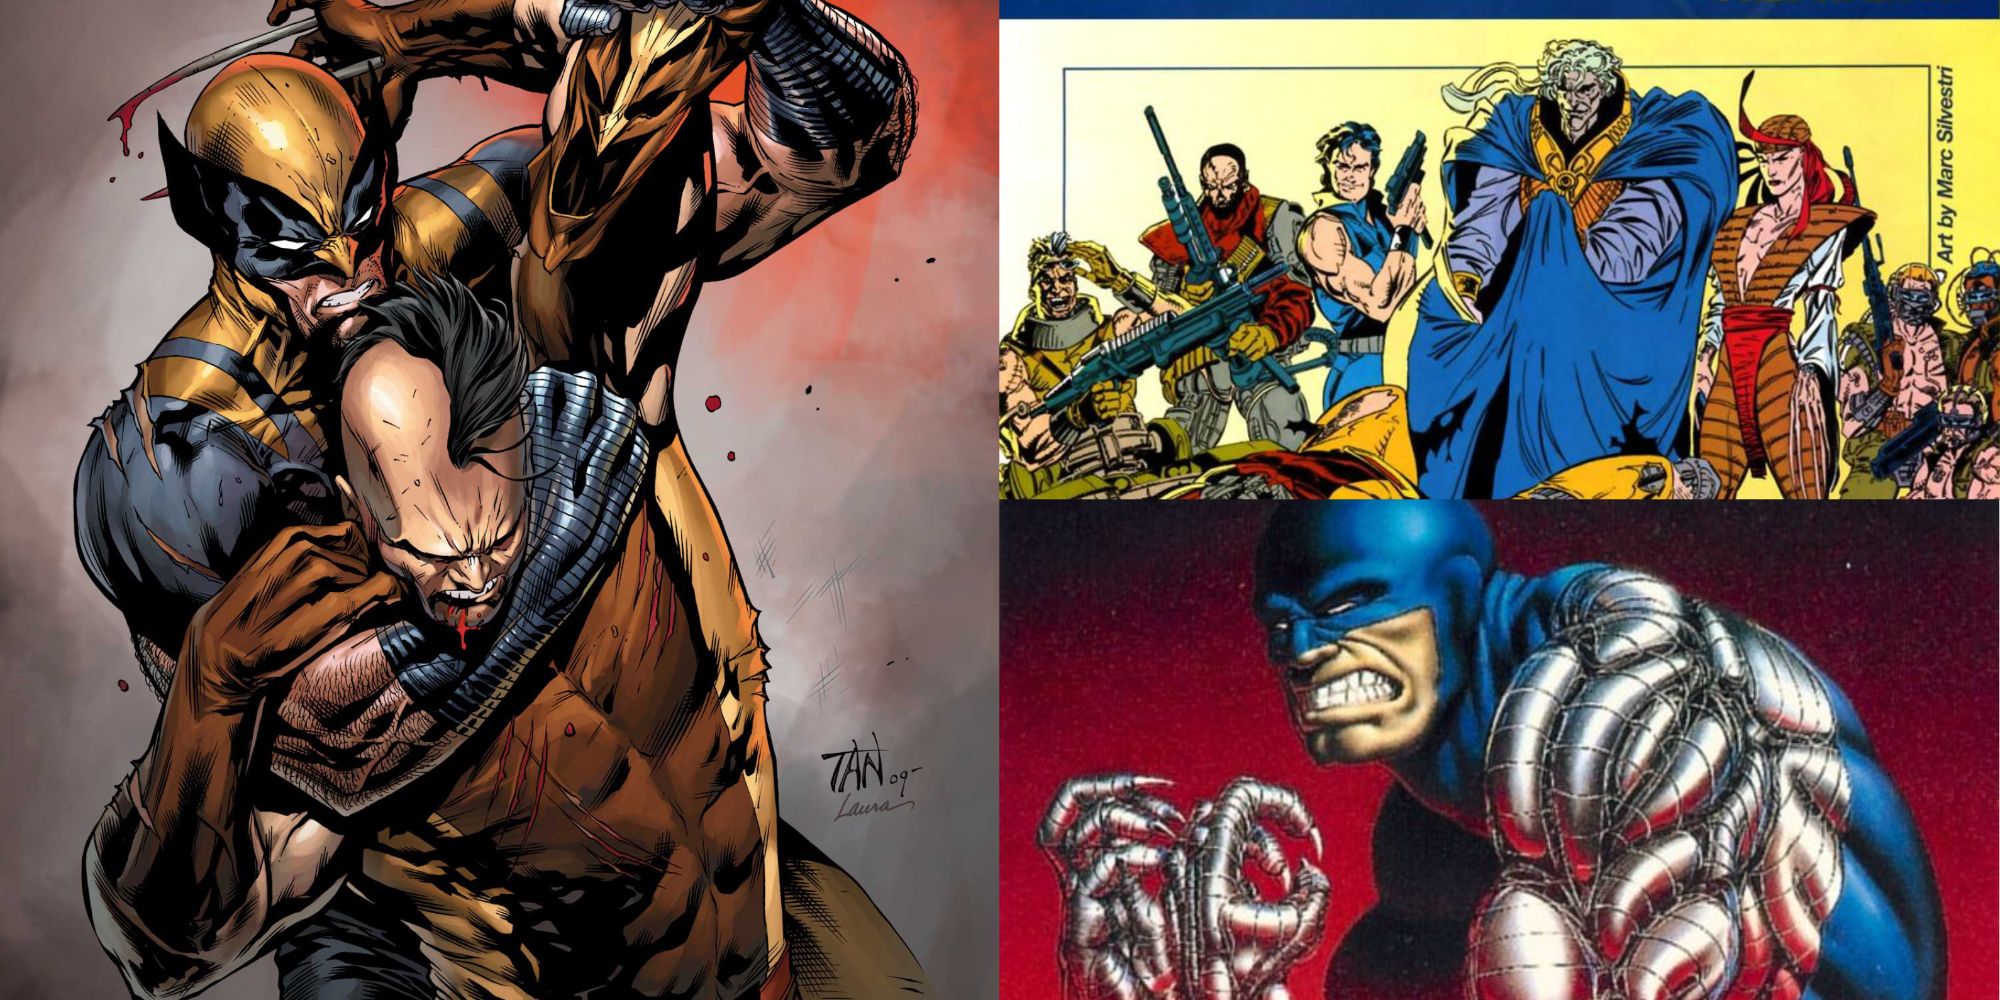 Clockwise from left: Wolverine grappling Daken, the Reavers, and Cyber